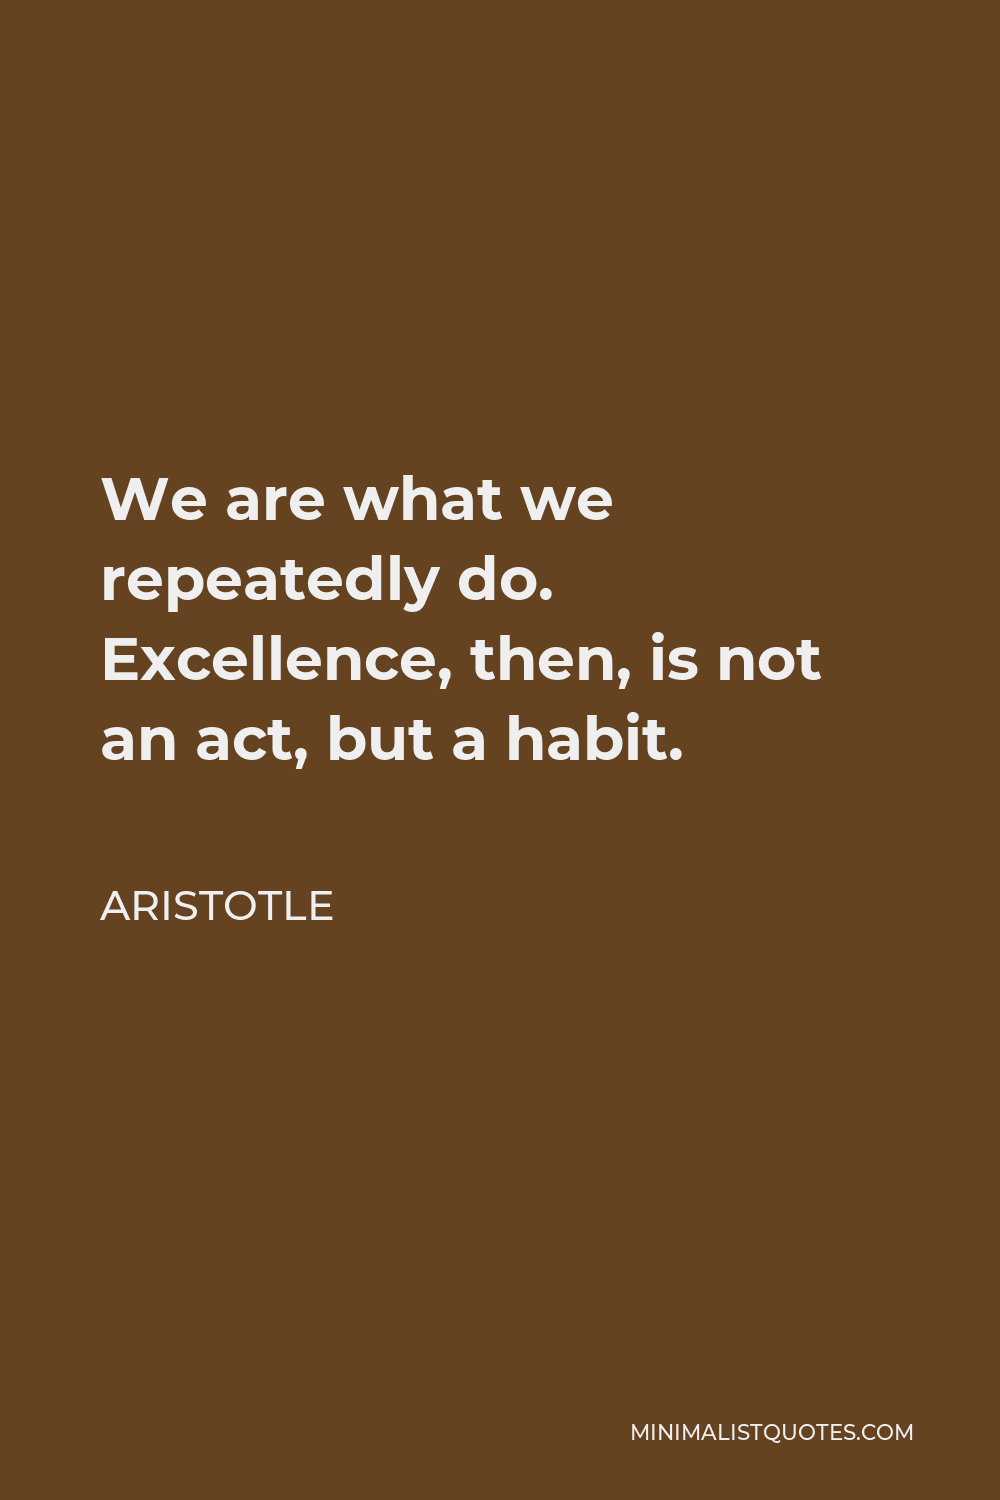 Aristotle Quote - We are what we repeatedly do. Excellence, then, is not an act, but a habit.